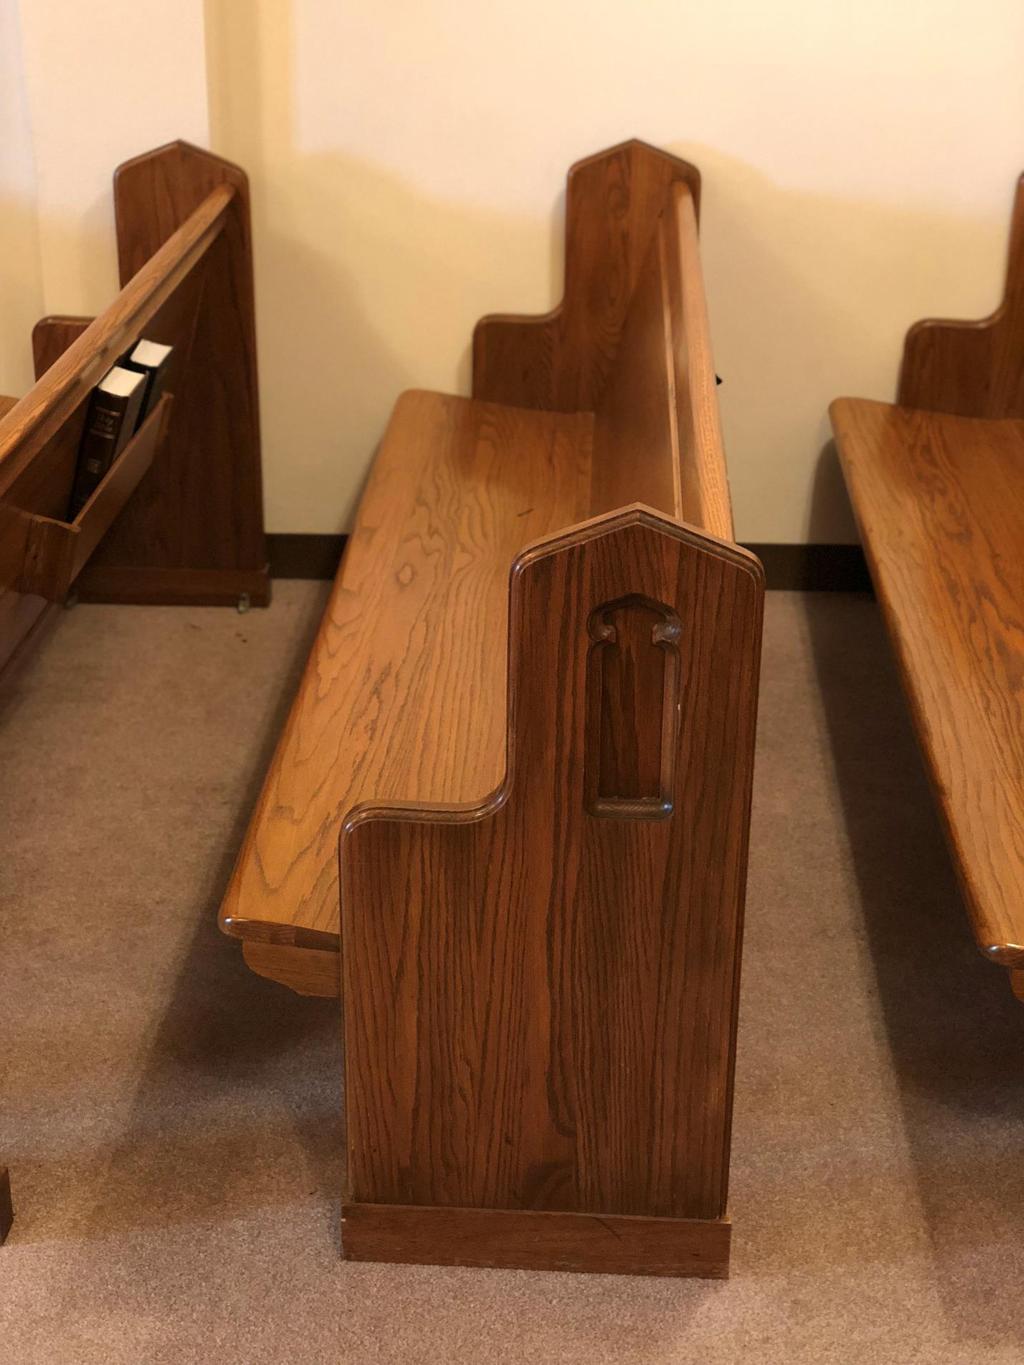 The New Pews We will finally have church pews.